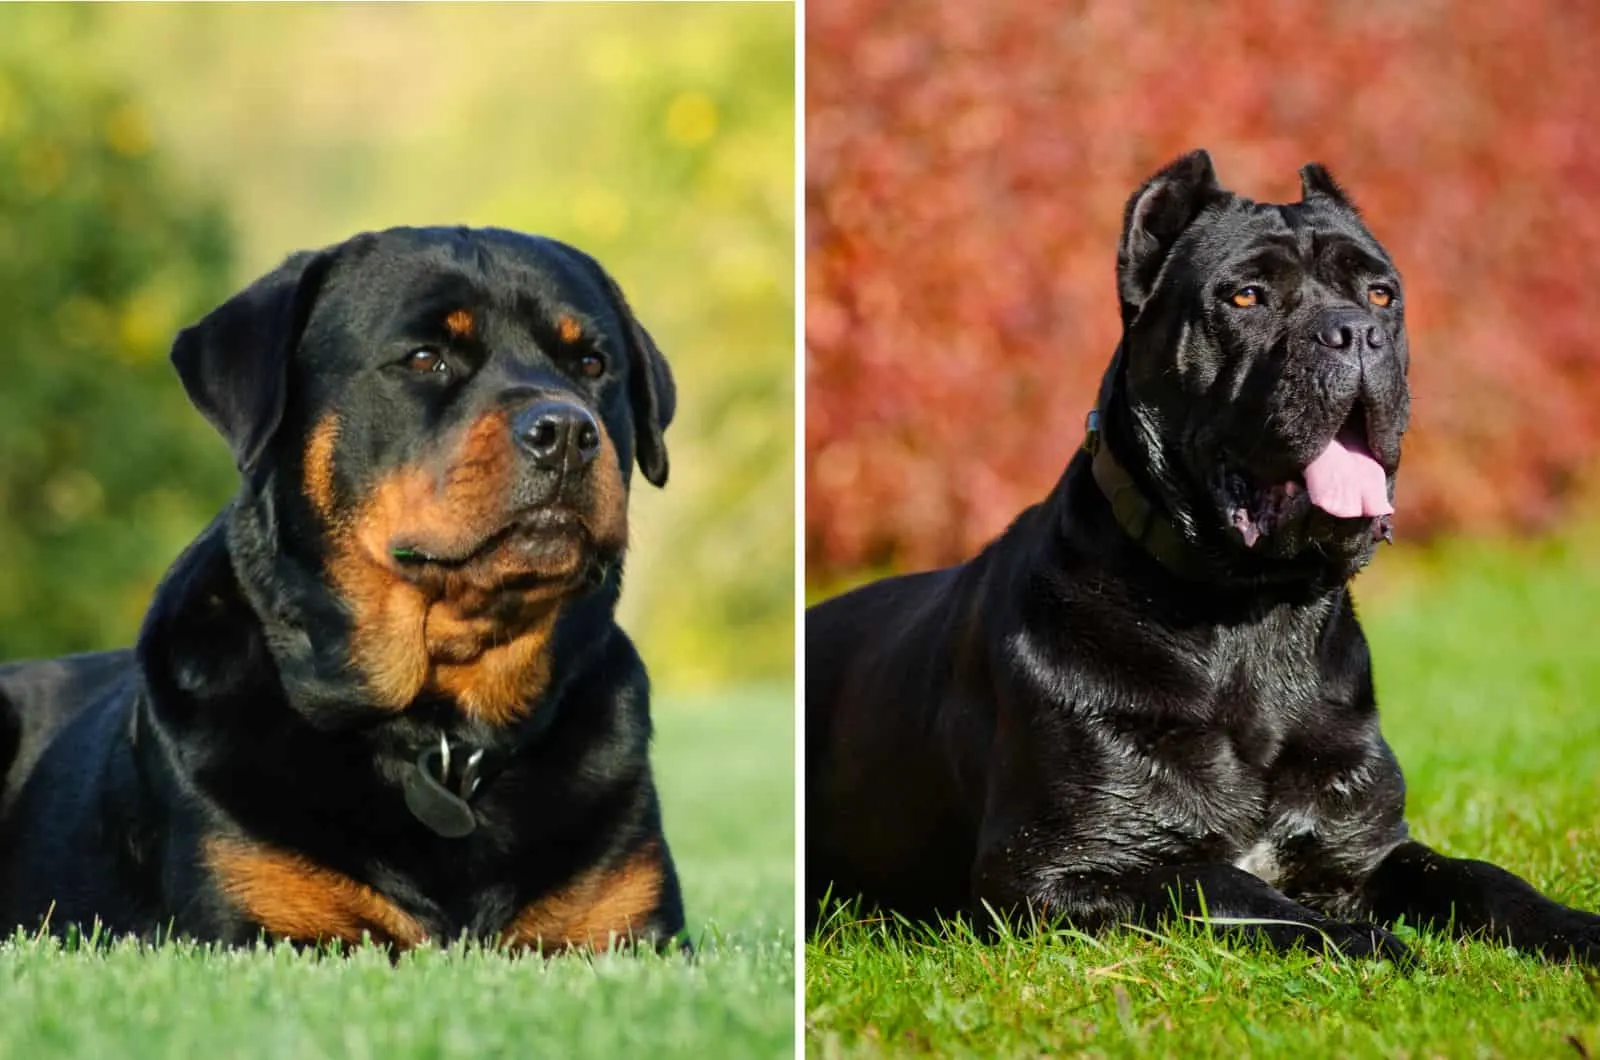 cane corso and a rottweiler lying in grass